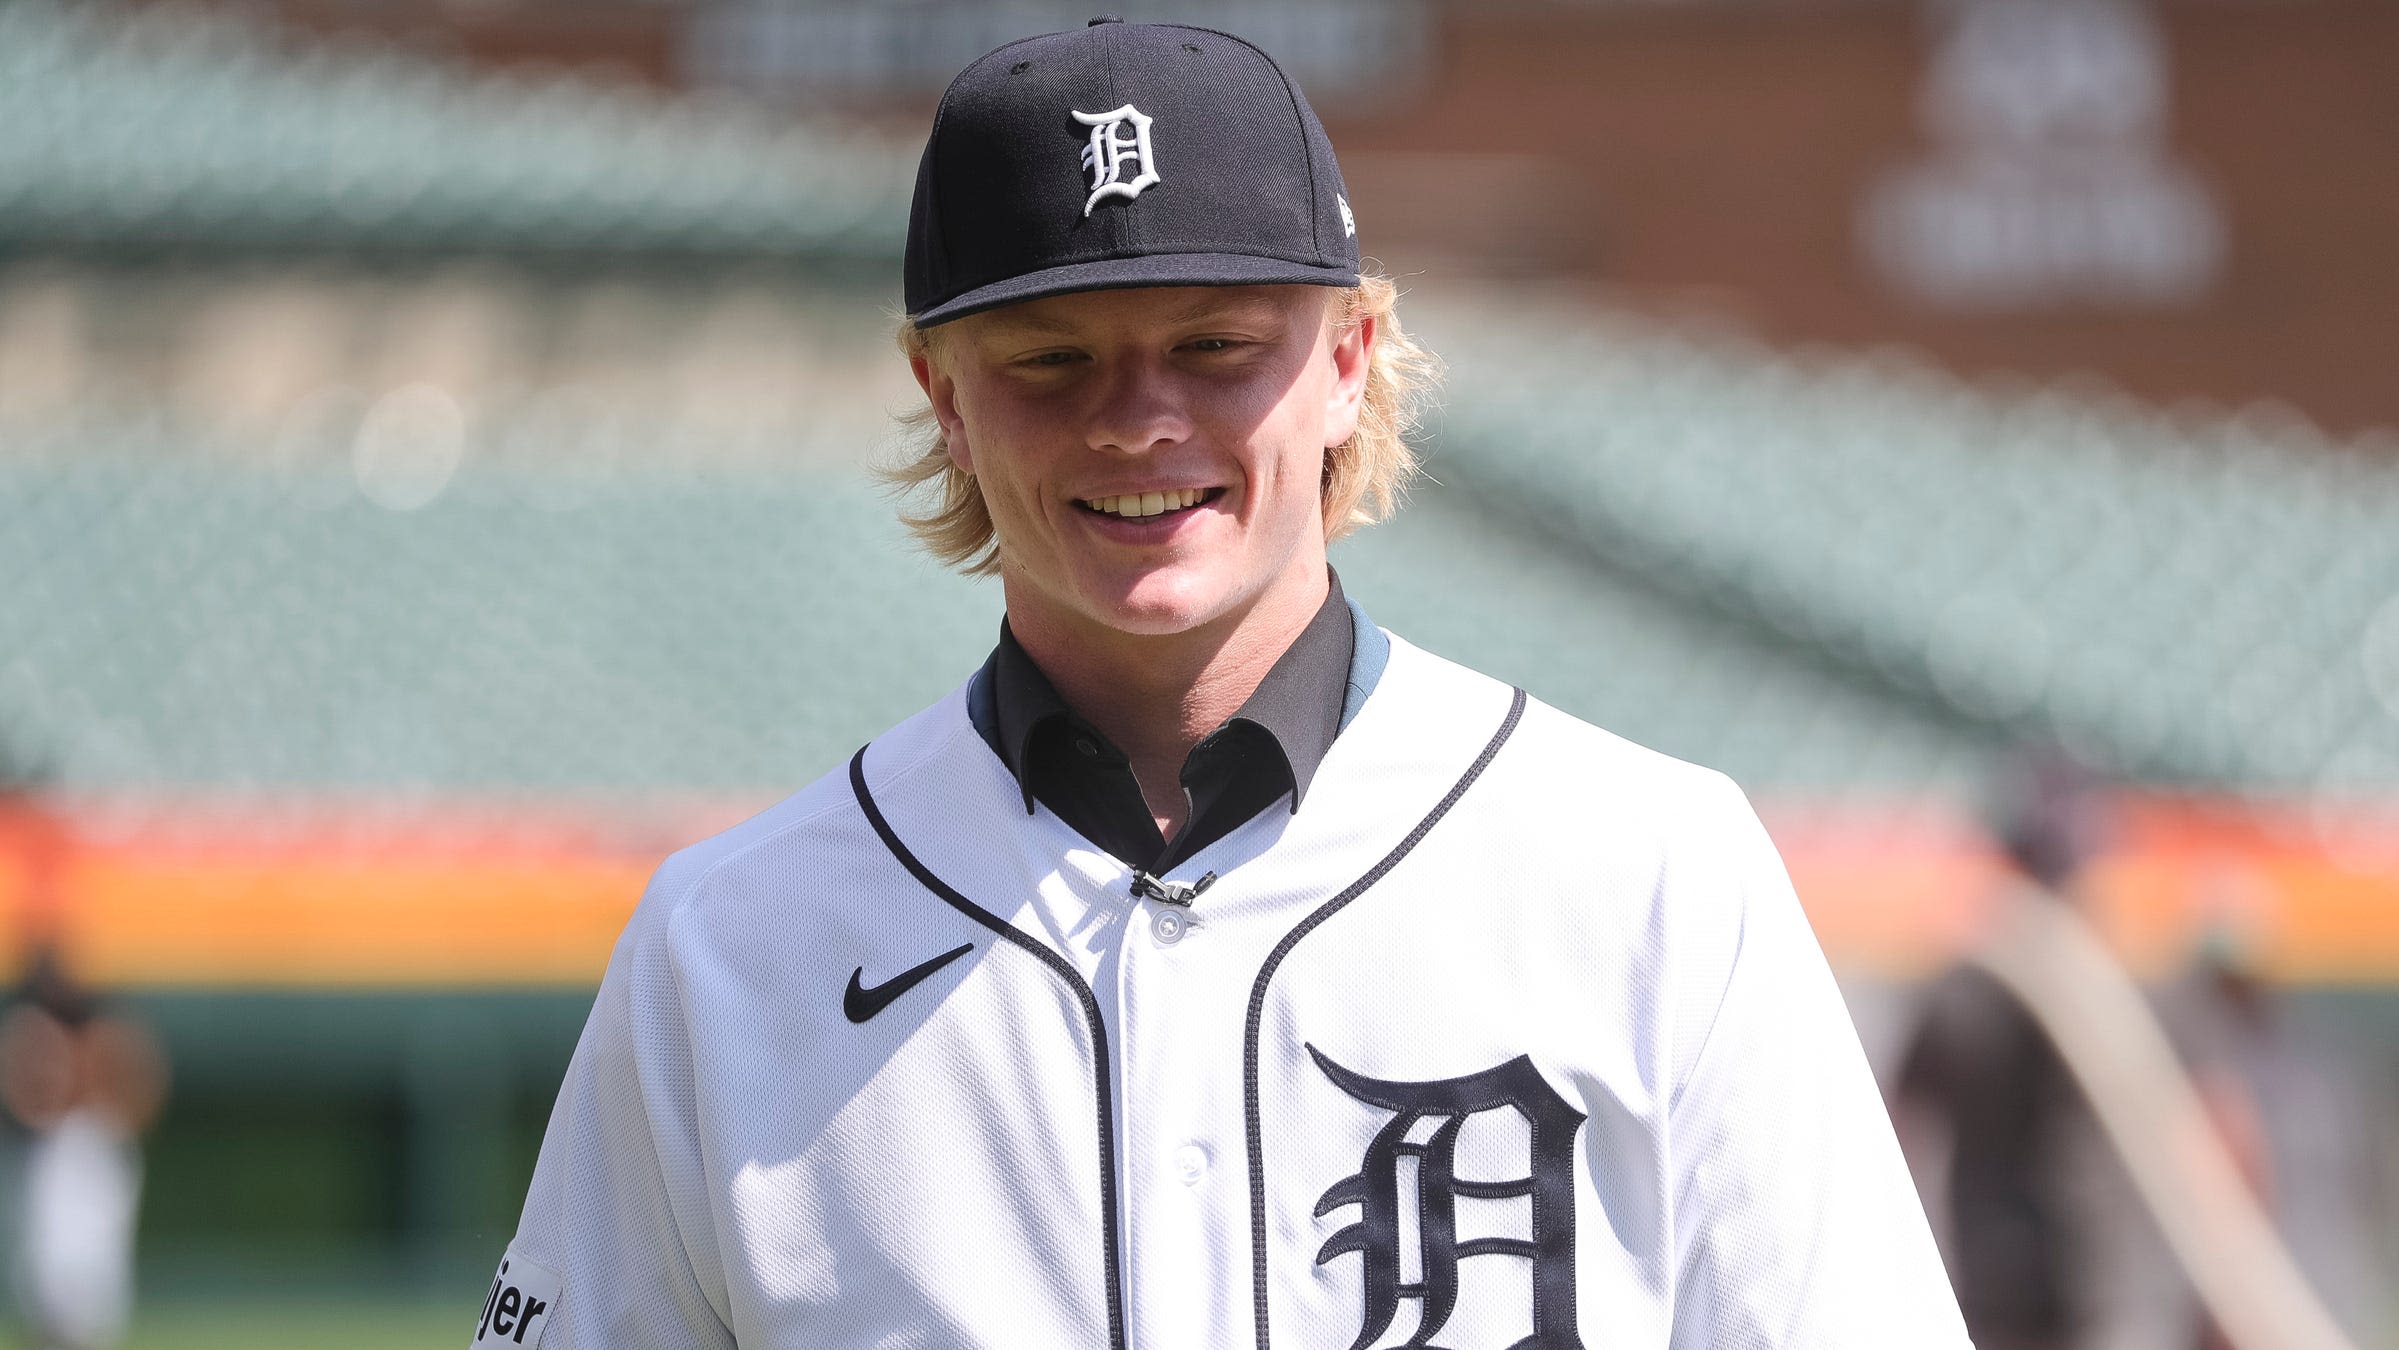 Detroit Tigers uniforms through the years: How they have changed